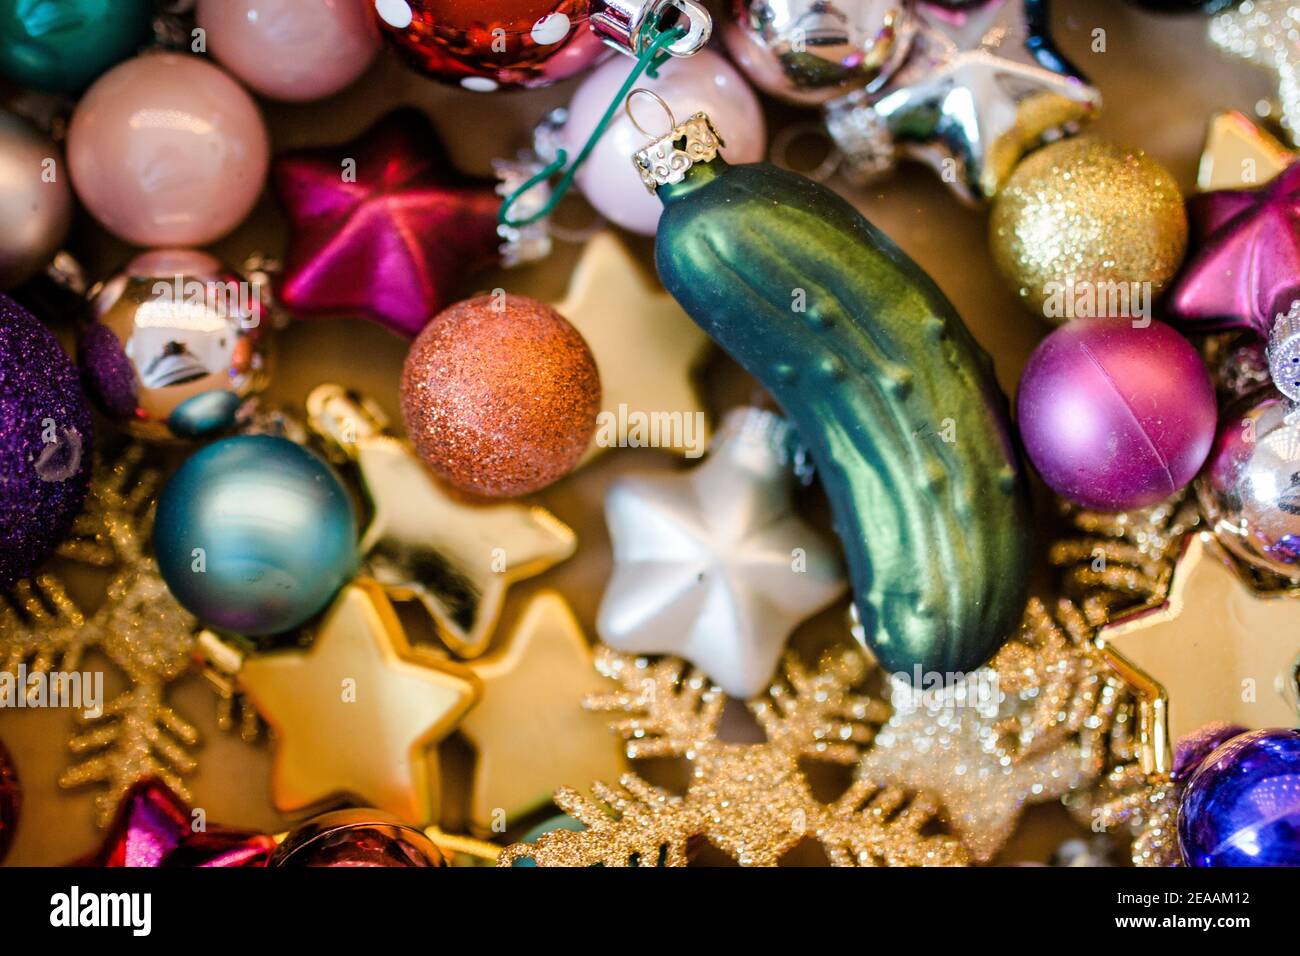 Christmas decorations, Christmas baubles different shapes and colors colorful with Christmas cucumber / Christmas pickle Stock Photo